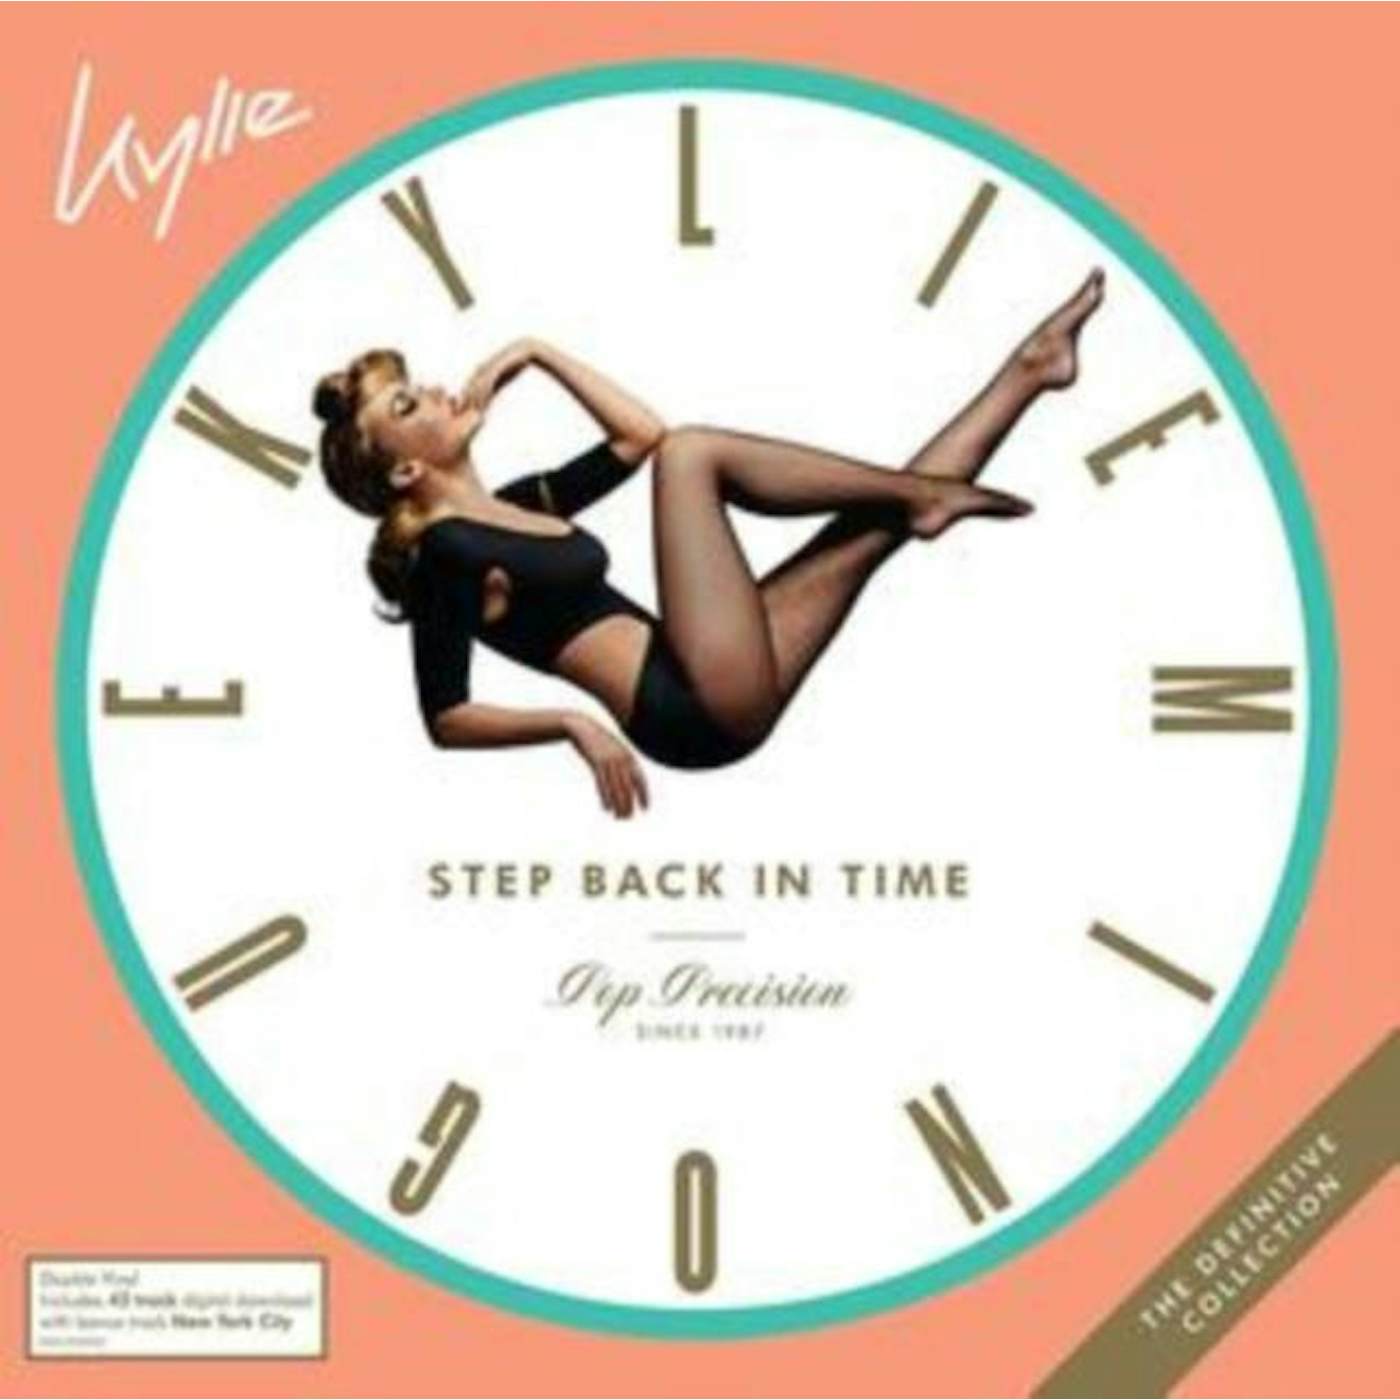 Kylie Minogue LP Vinyl Record - Step Back In Time: The Definitive Collection